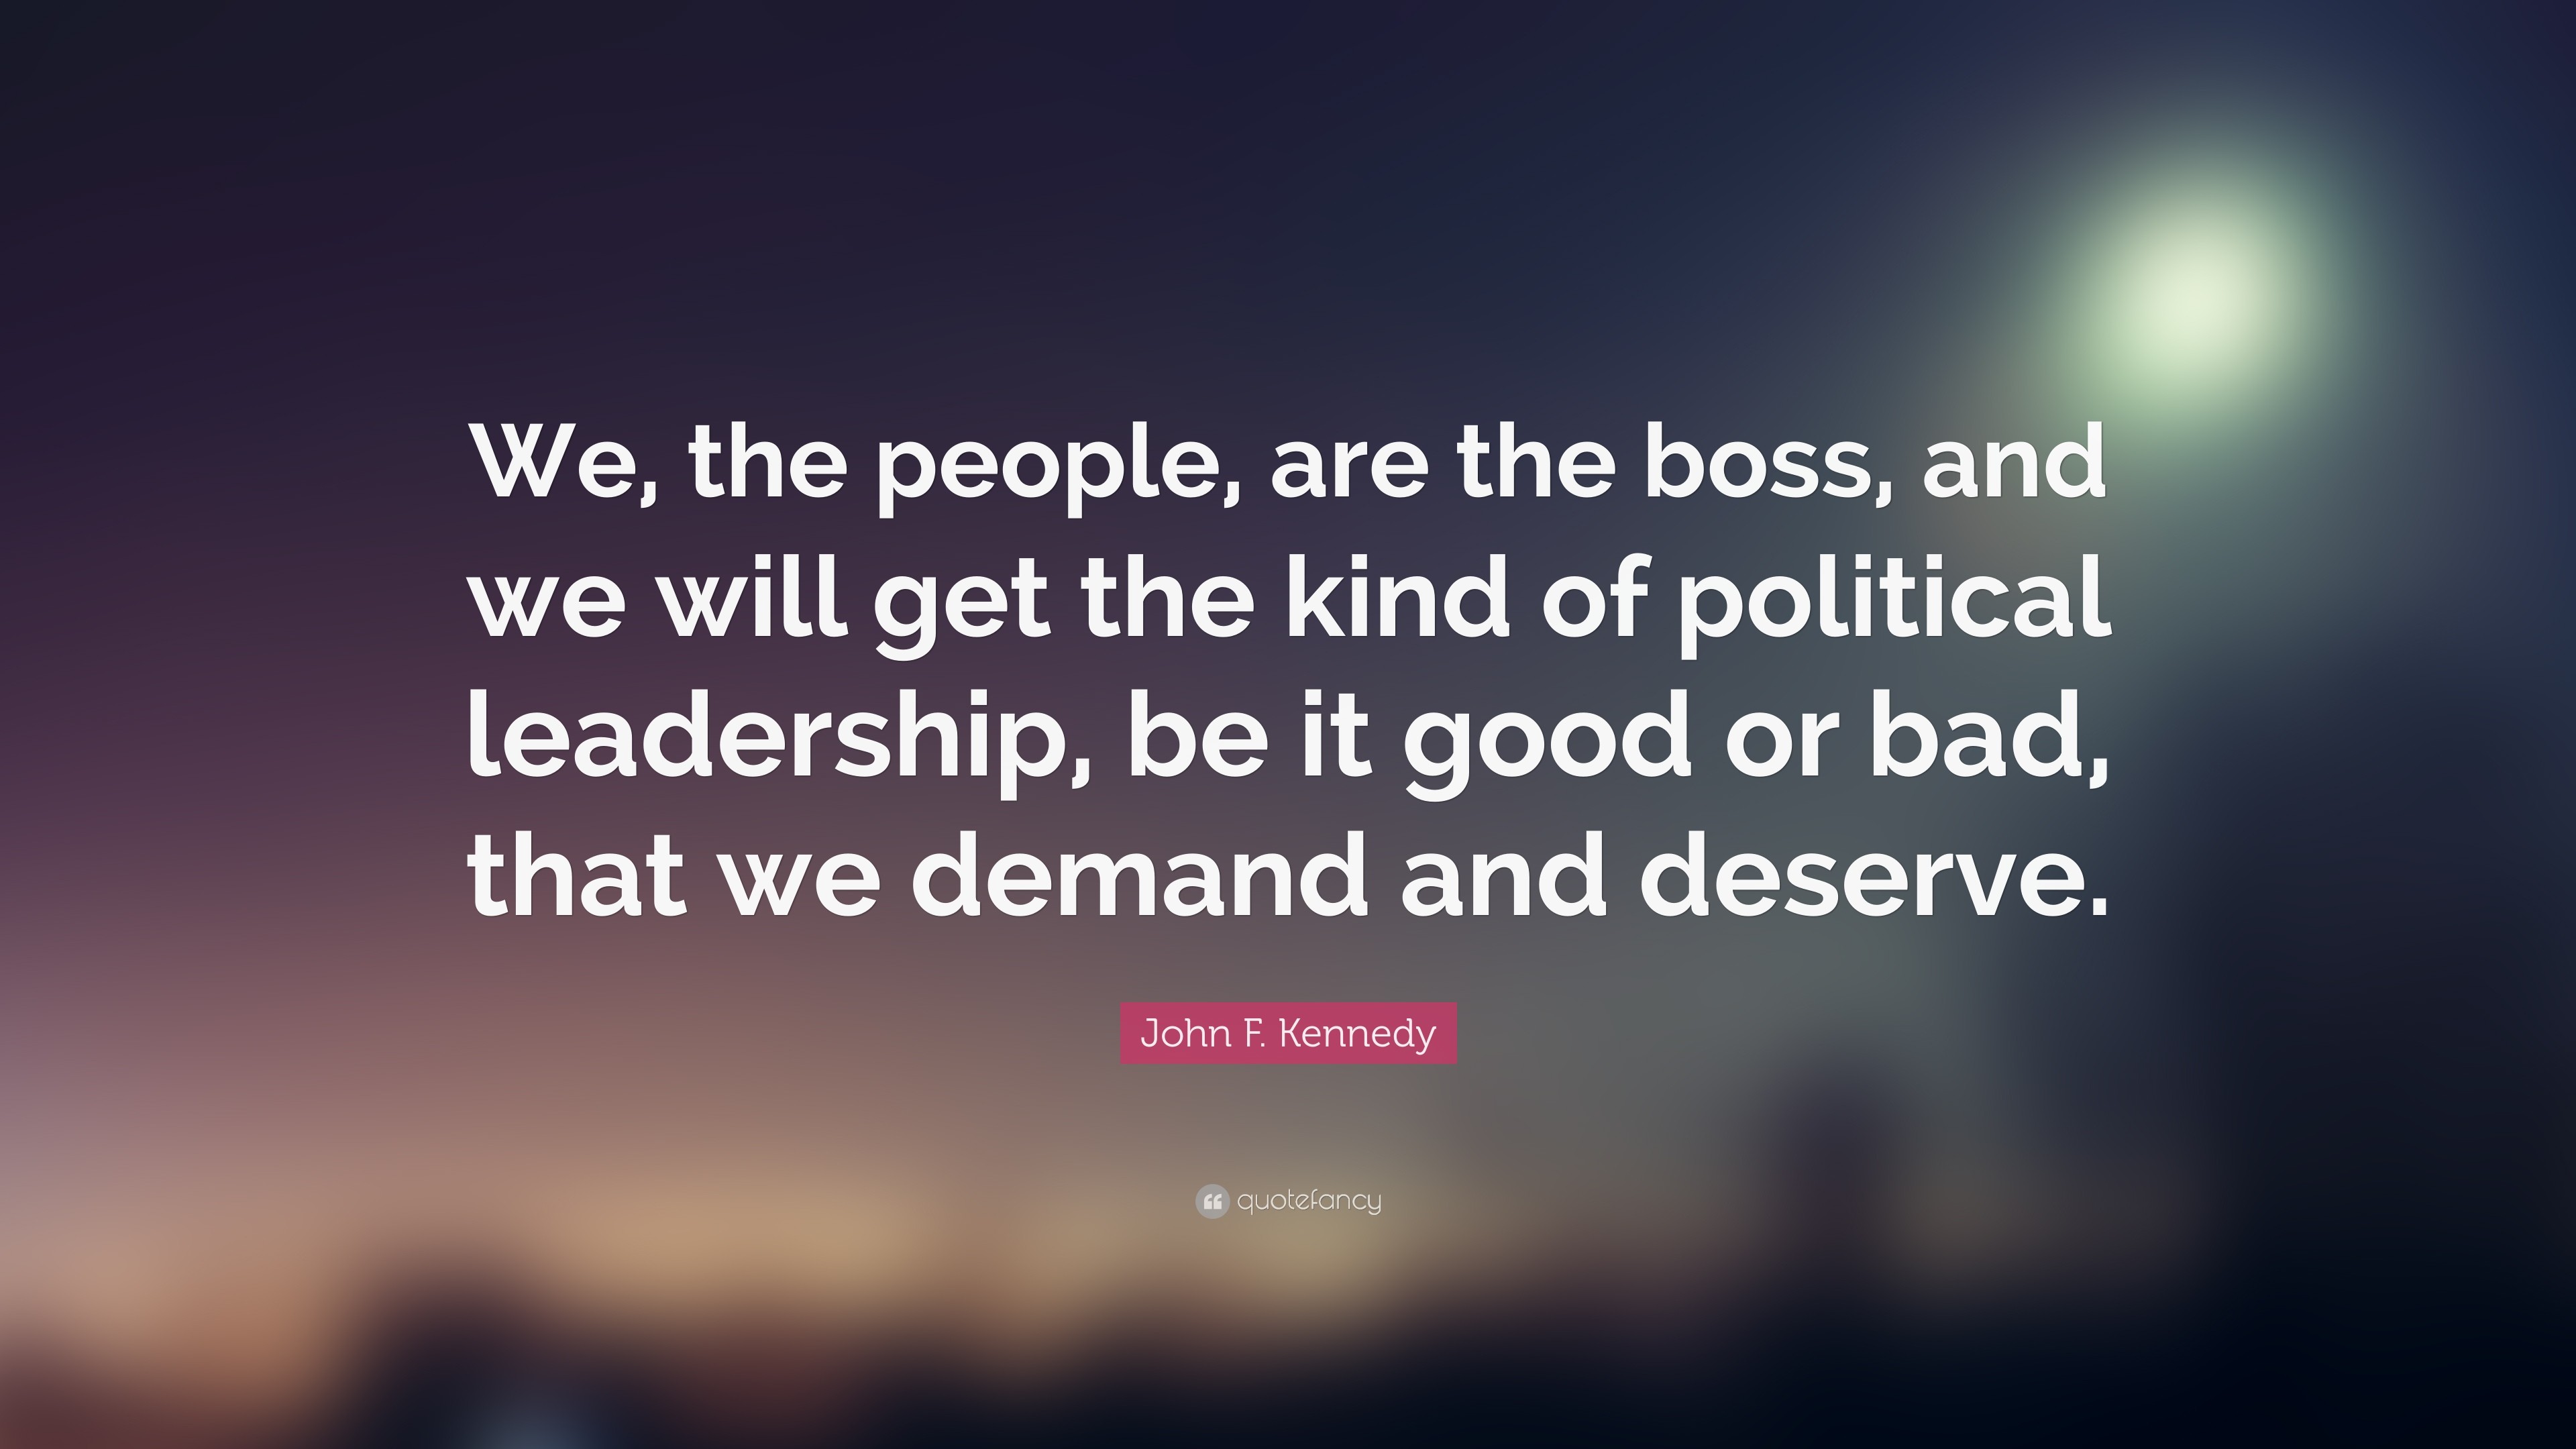 3840x2160 John F. Kennedy Quote: “We, the people, are the boss,